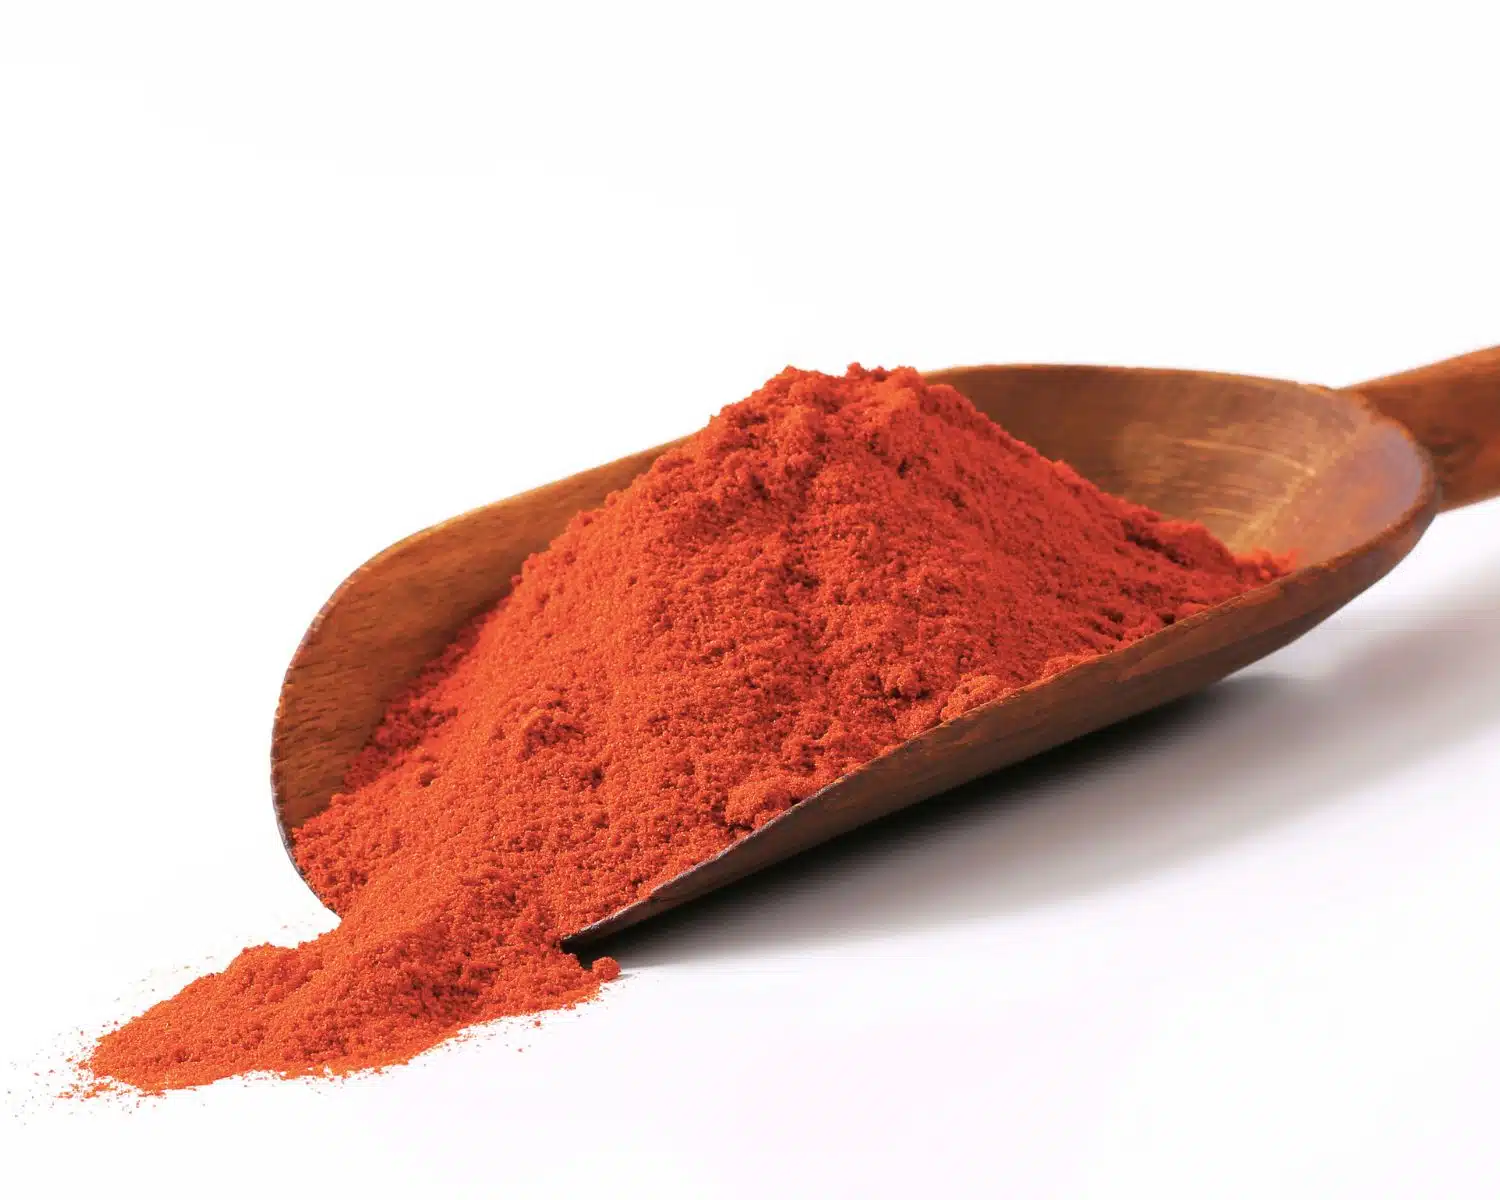 Paprika powder is in a big scoop and scattered out in front of it.